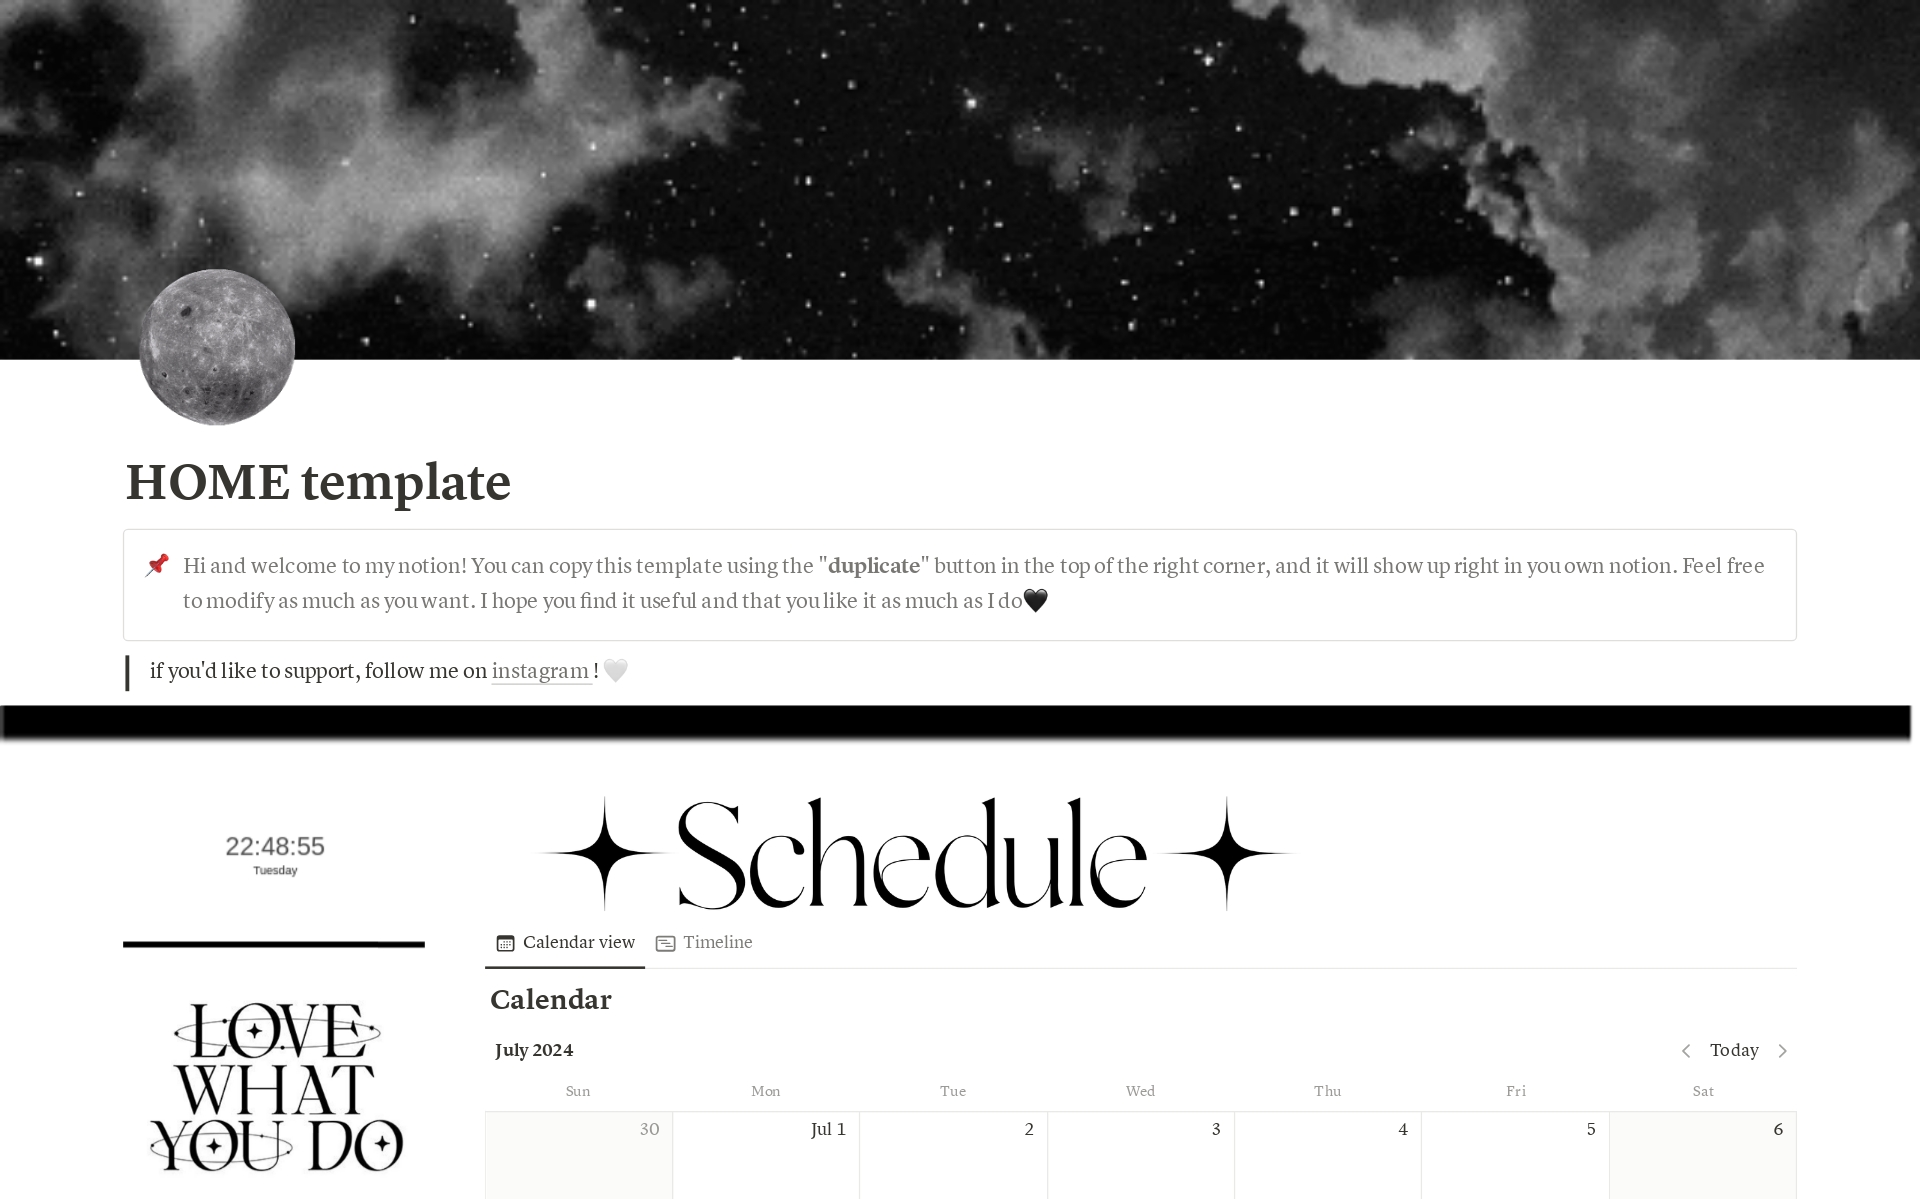 Want to streamline your workflow and boost productivity? Our custom Notion template help you organize projects, manage tasks, and track goals effortlessly. 

Take your productivity to the next level.